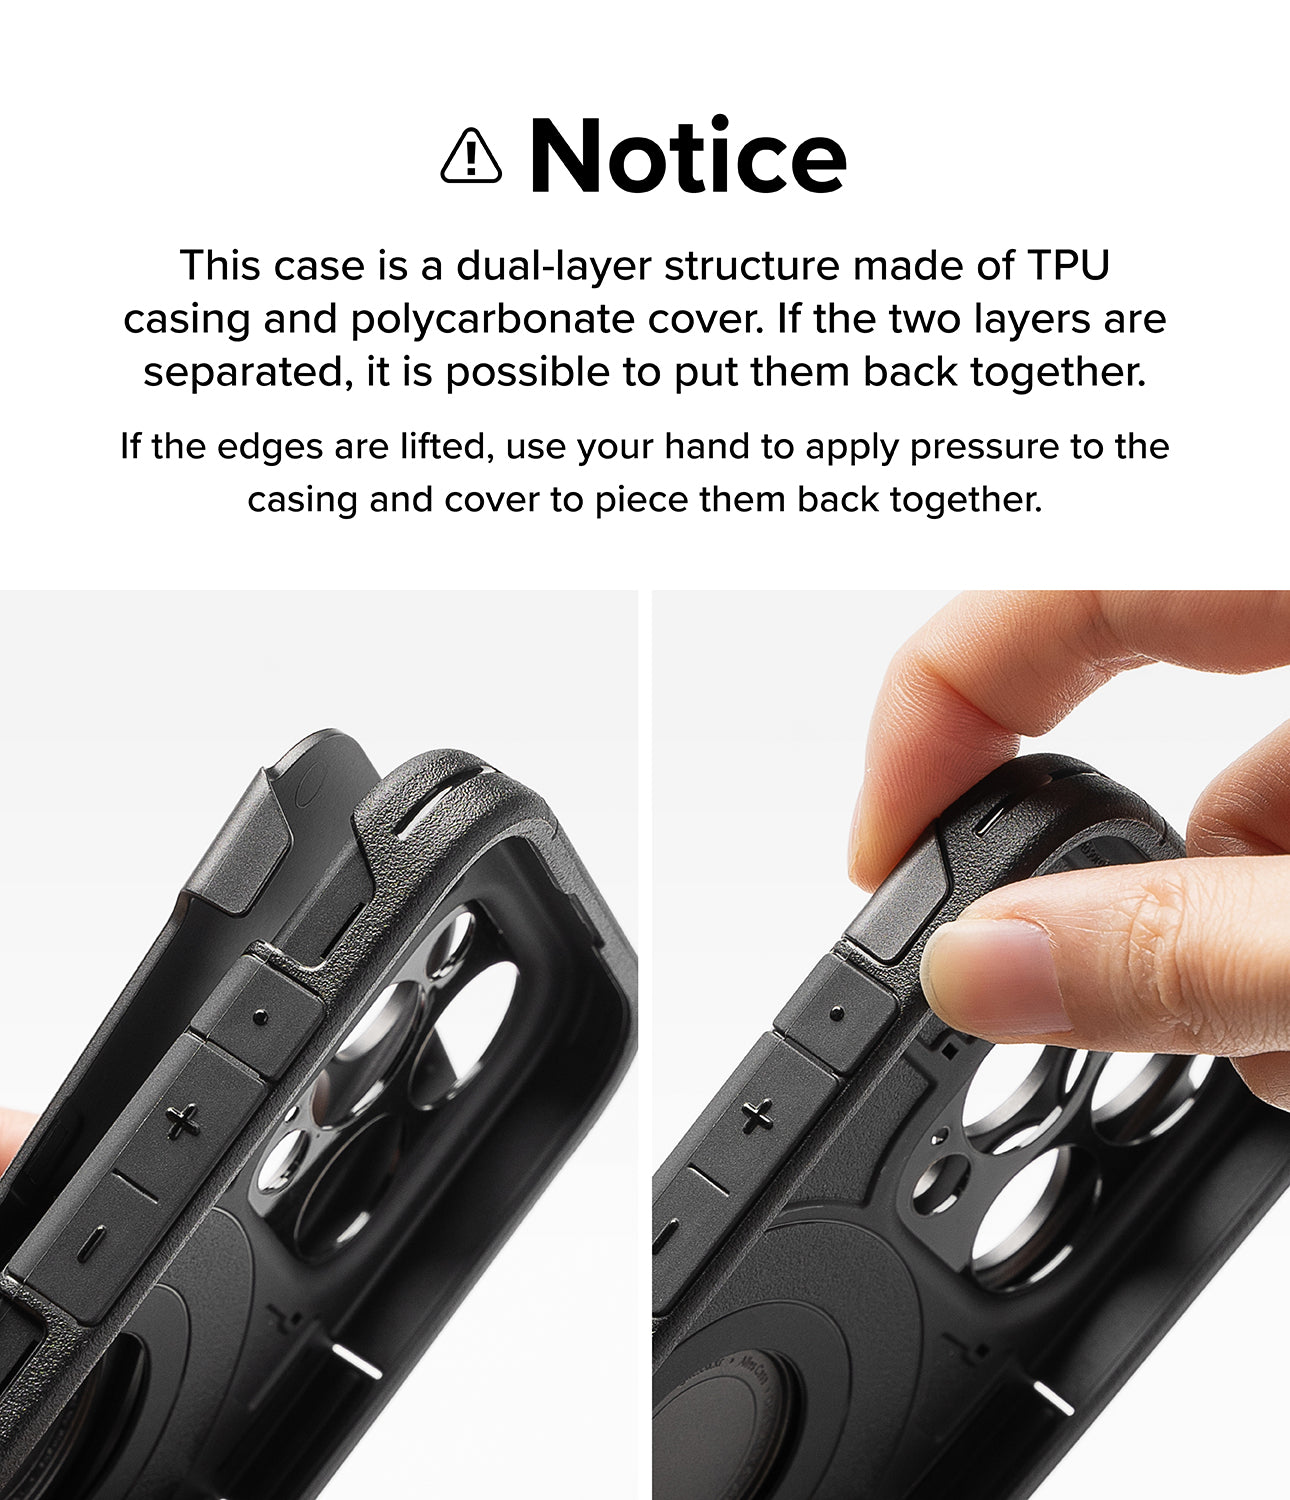 iPhone 15 Pro Case | Alles - Gun Metal - Notice. This case is a dual-layer structure made of TPU casing and polycarbonate cover. If the two layers are separated, it is possible to put them back together. If the edges are lifted, use your hand to apply pressure to the casing and cover to piece them back together.